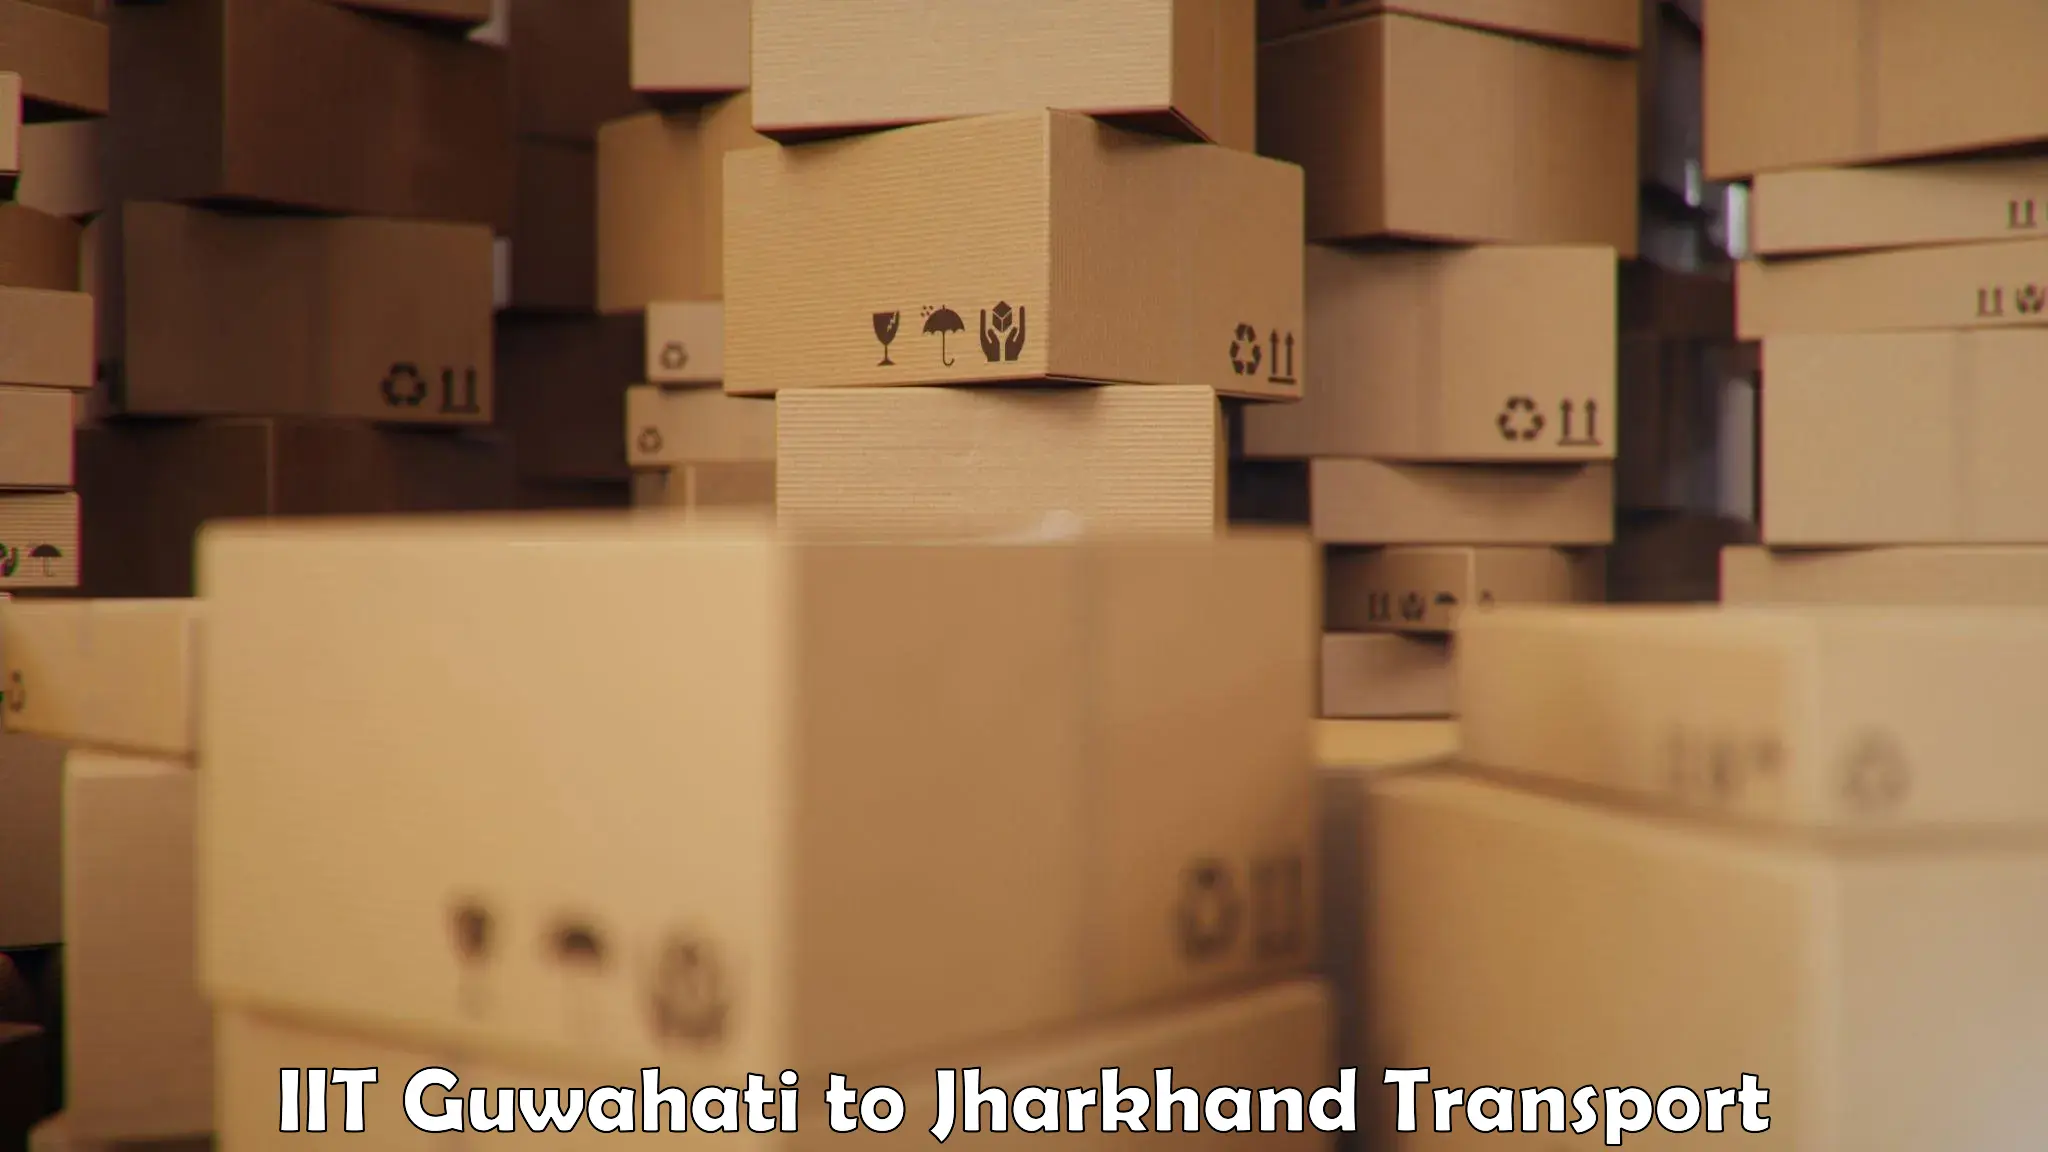 Goods delivery service IIT Guwahati to Chandil